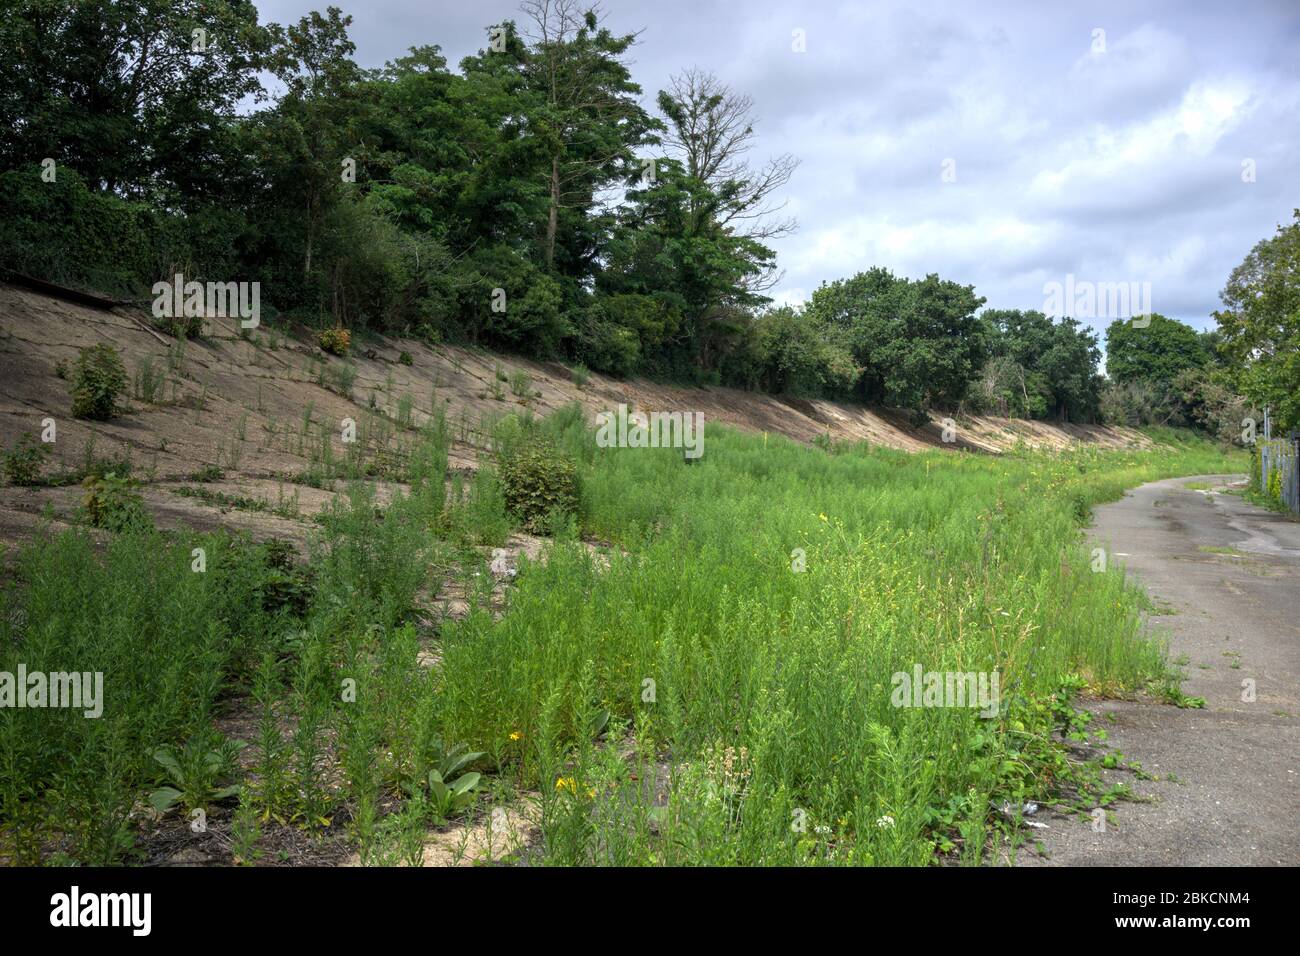 Weybridge, Surrey, United Kingdom - July 23, 2019: Dilapidated and overgrown section of former Brooklands racetrack with cracks in the pavement and we Stock Photo